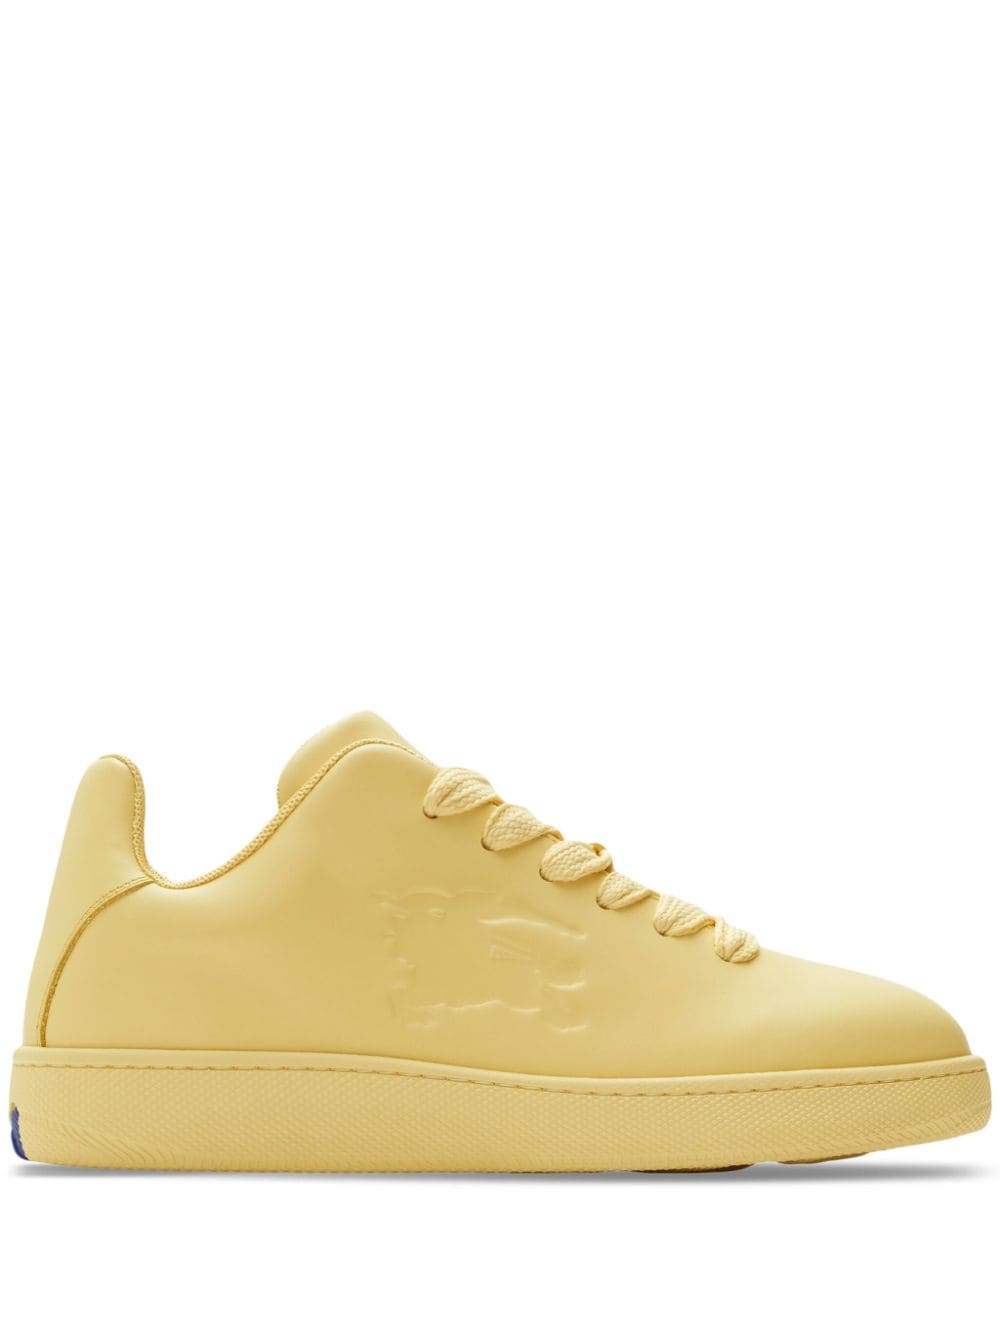 Burberry Box leather sneakers - Yellow von Burberry